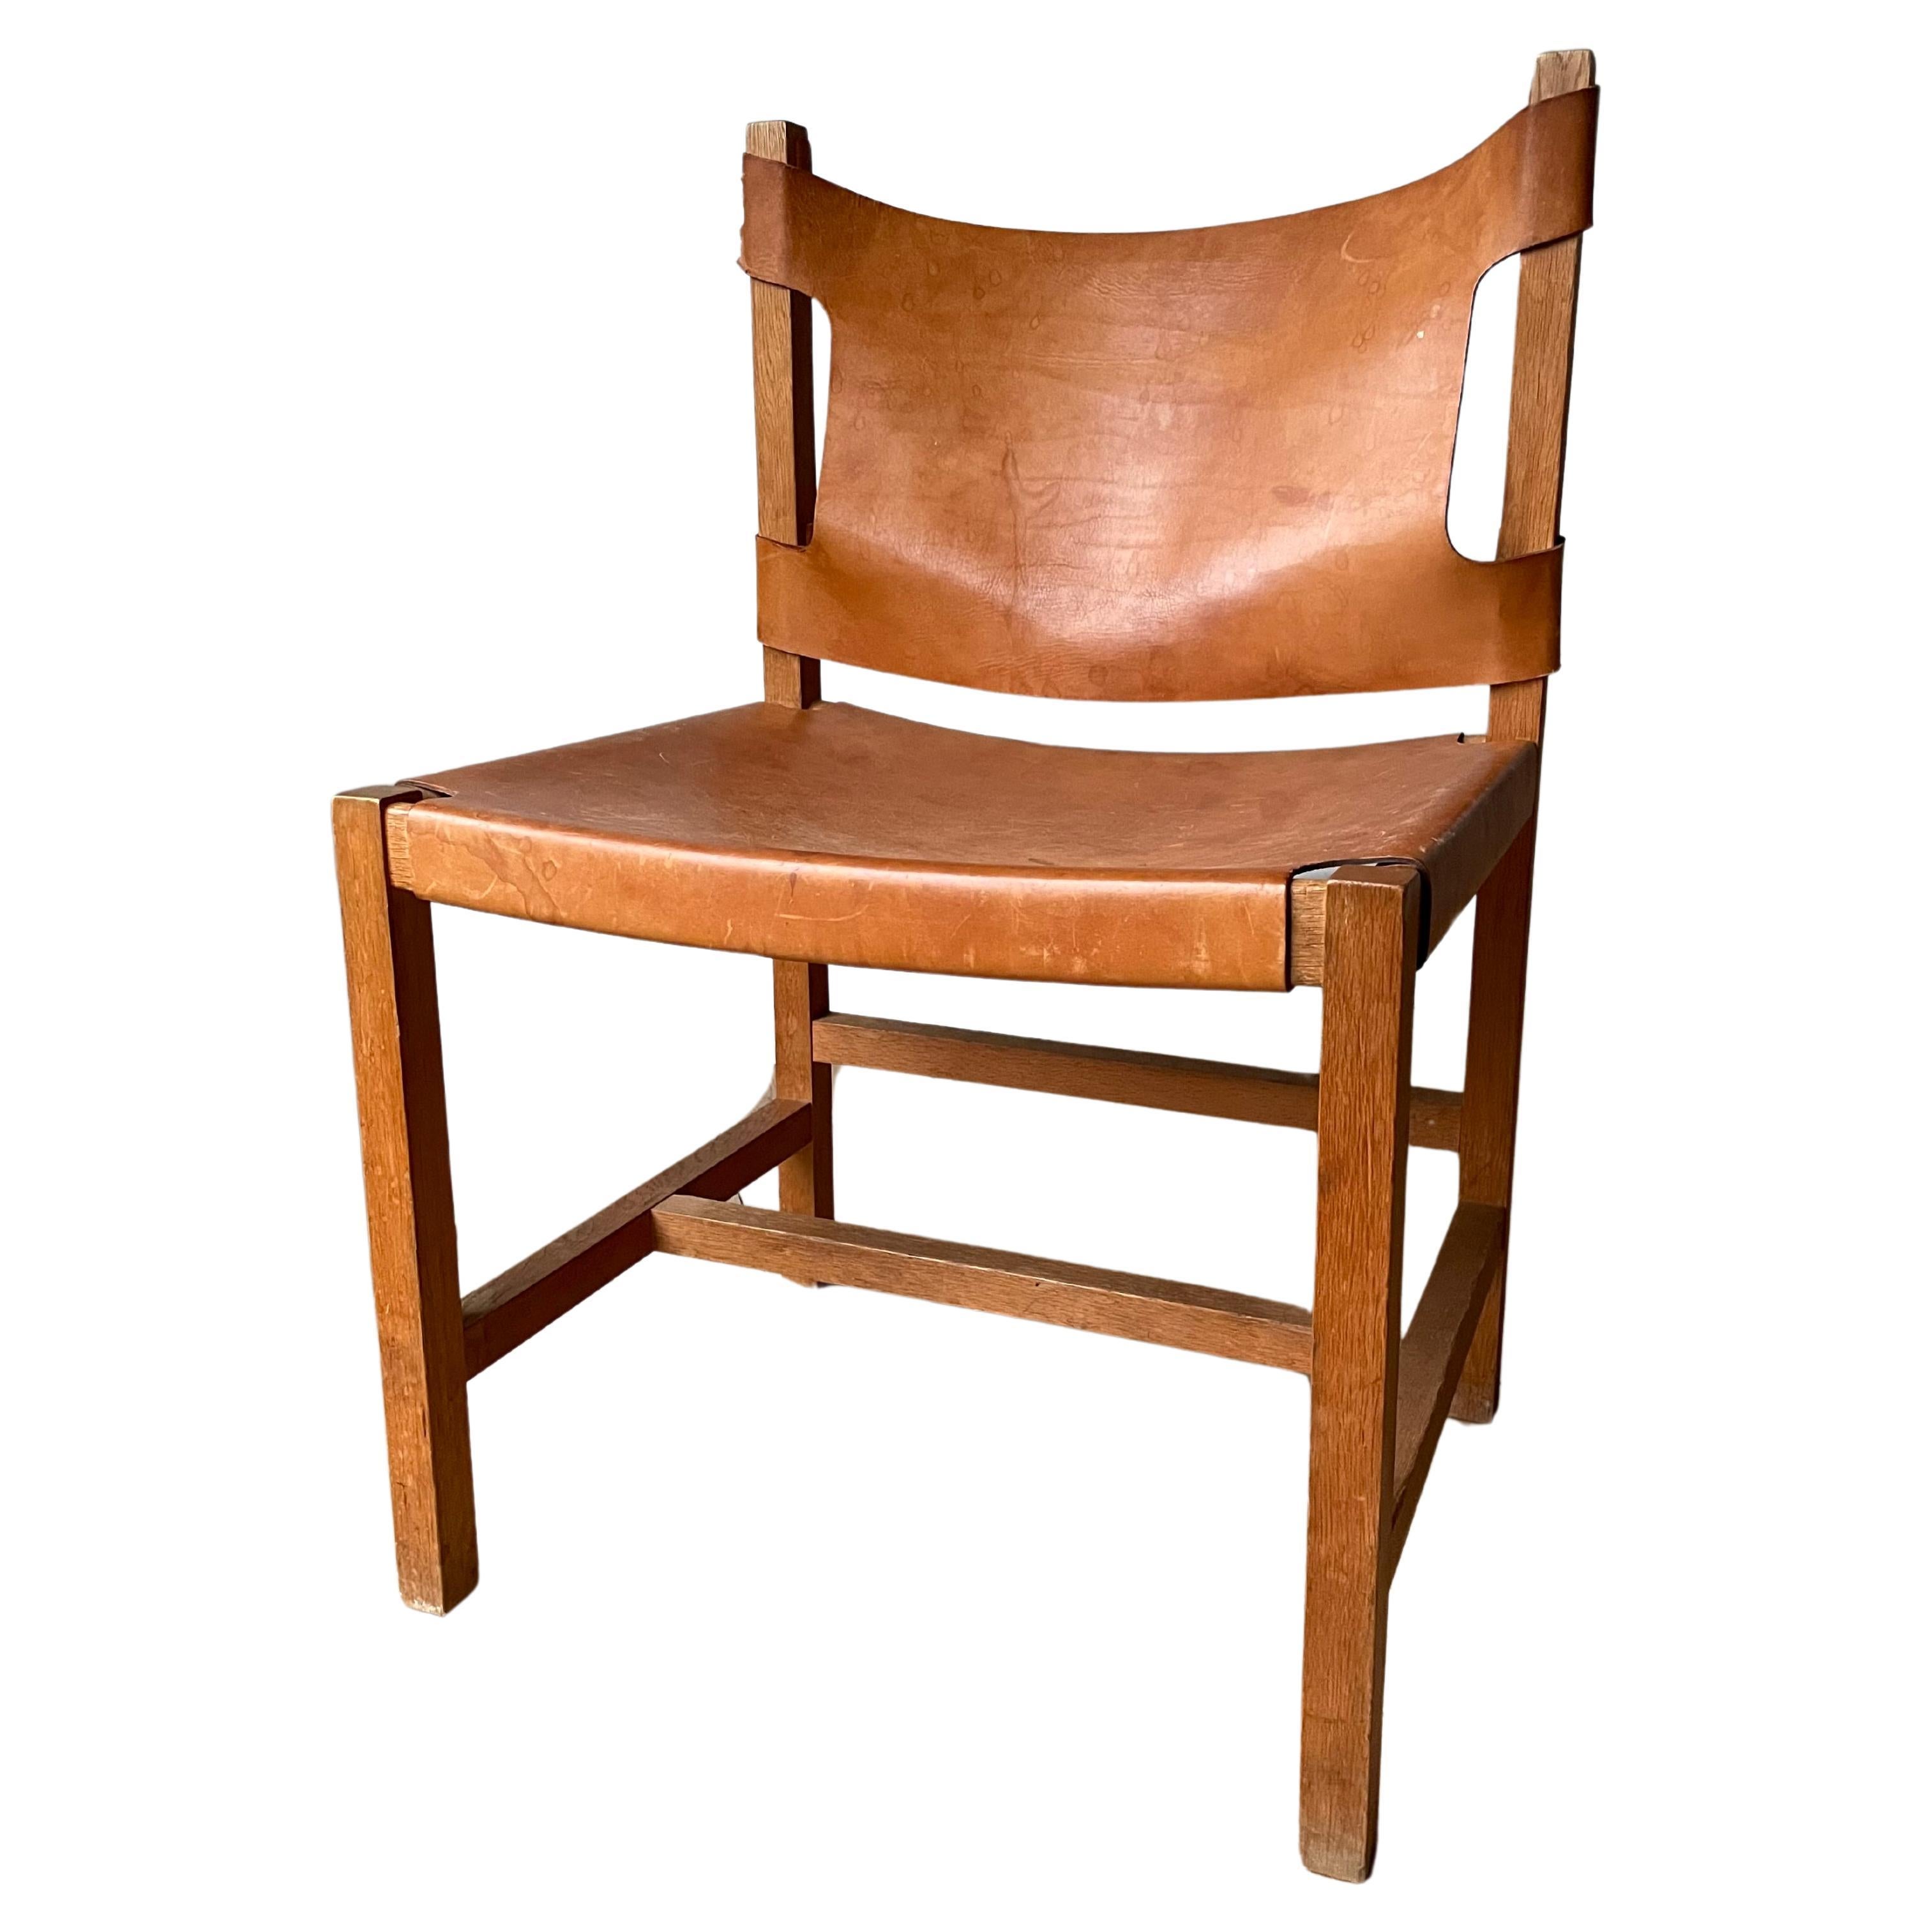 Danish Modern Wooden Leather Seat Chair, 1960s For Sale